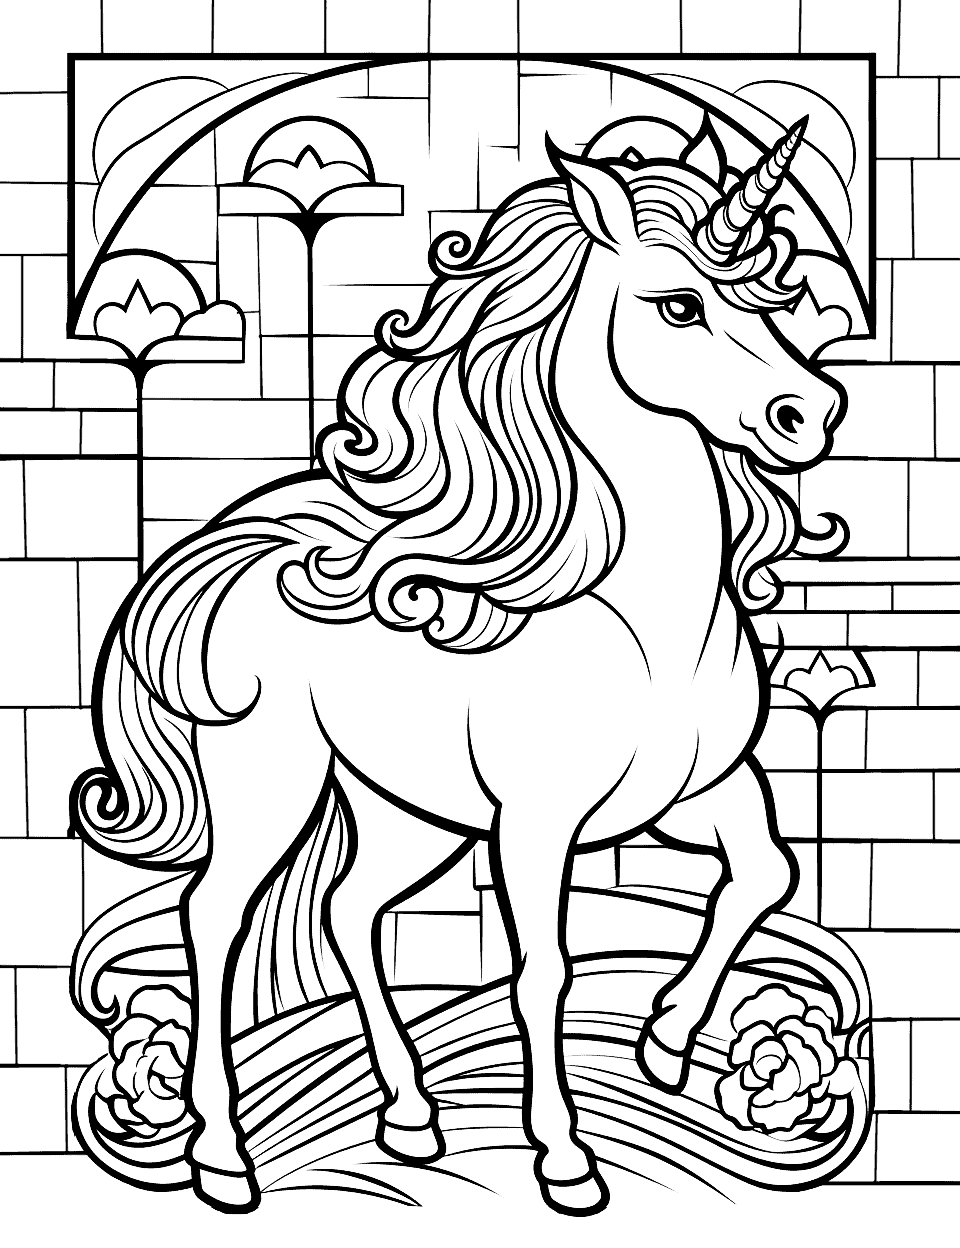 Unicorn Stained Glass Window Coloring Page - A unicorn standing next to a stained glass window with vibrant colors and intricate patterns.